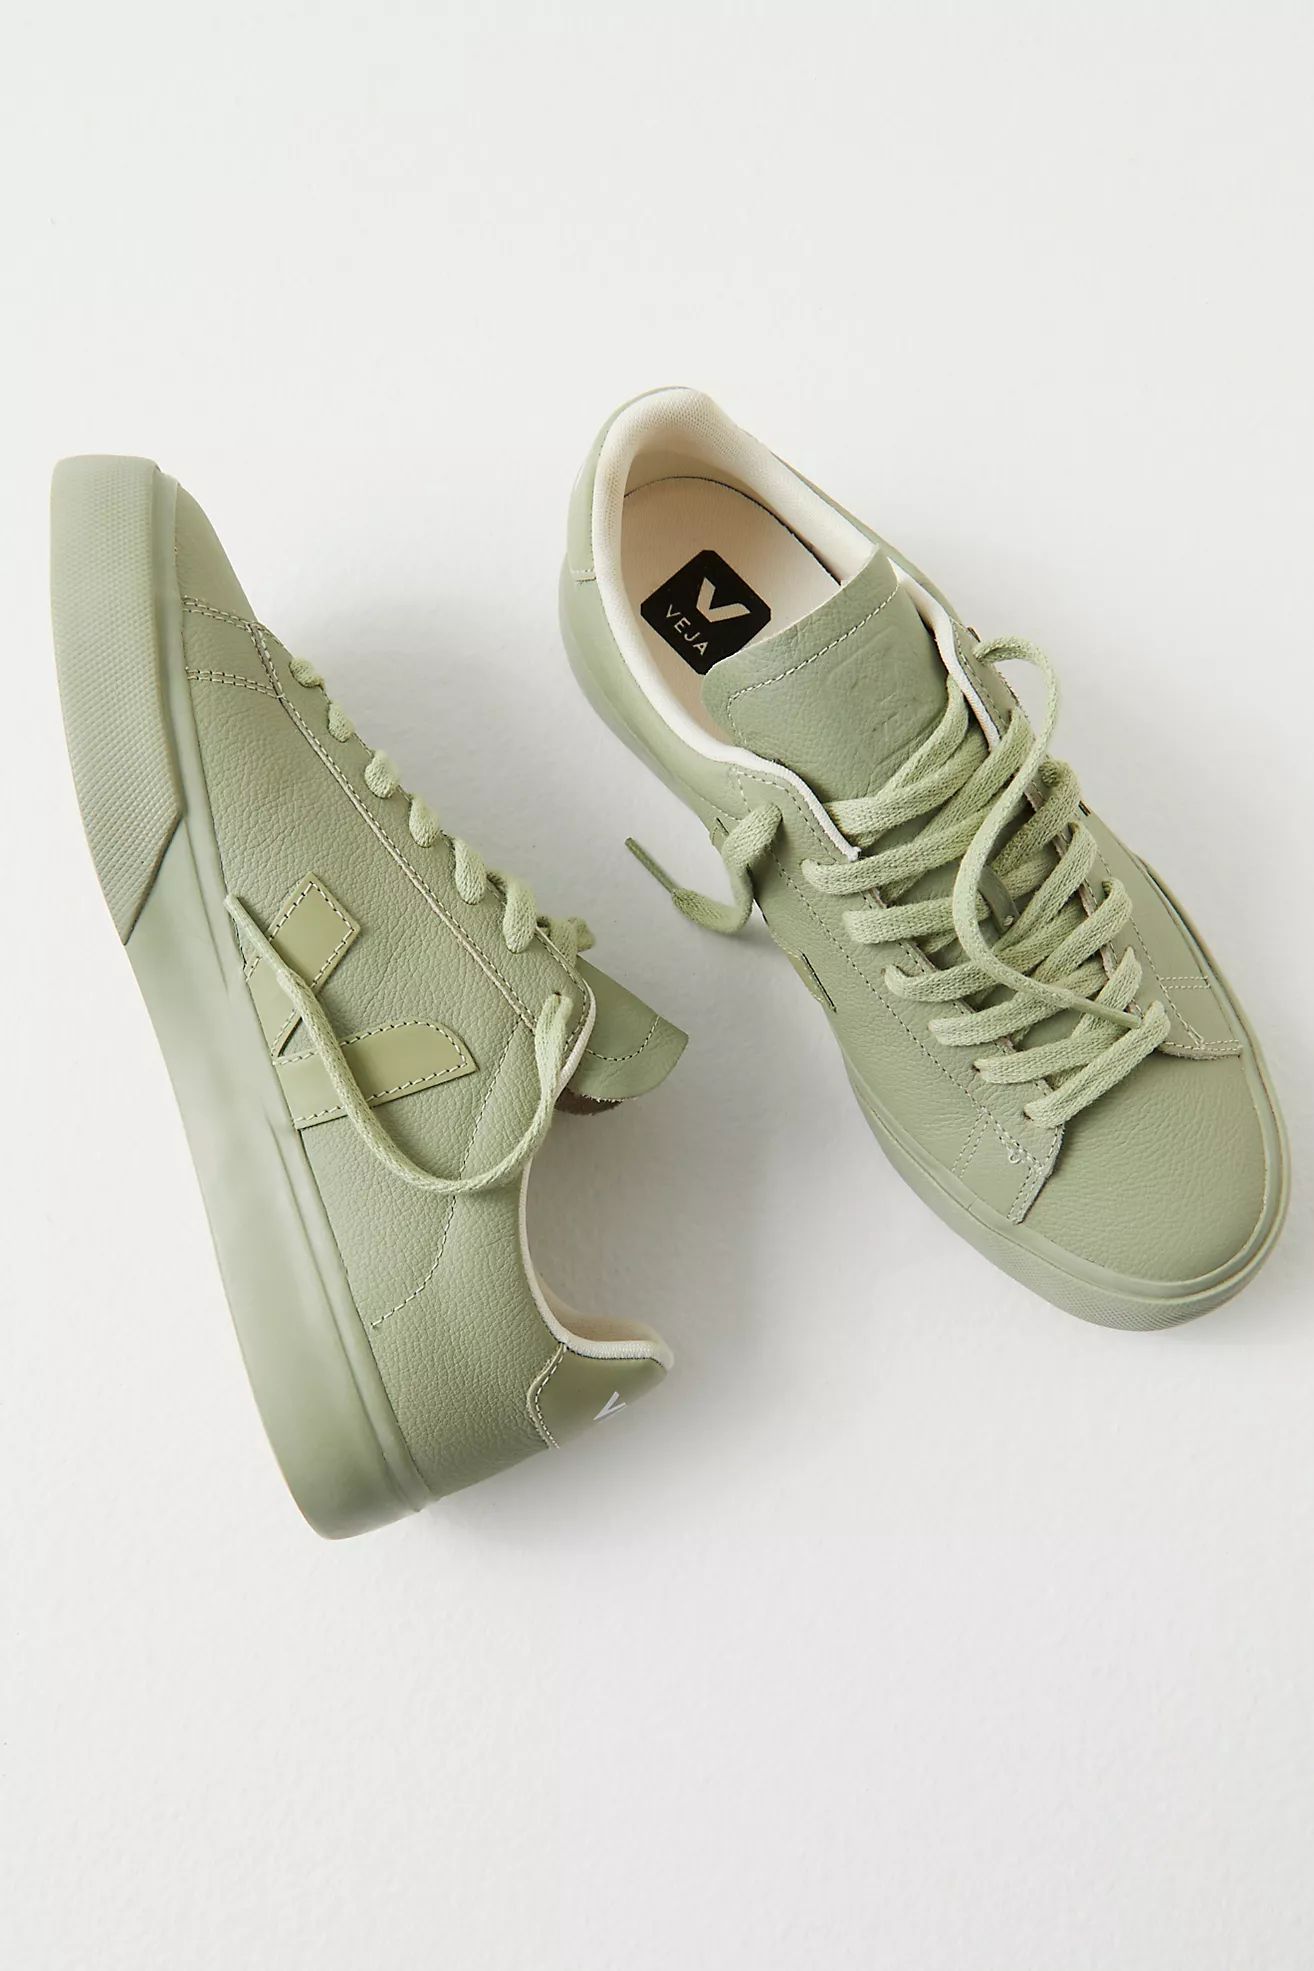 Veja Campo Leather Sneakers | Free People (Global - UK&FR Excluded)